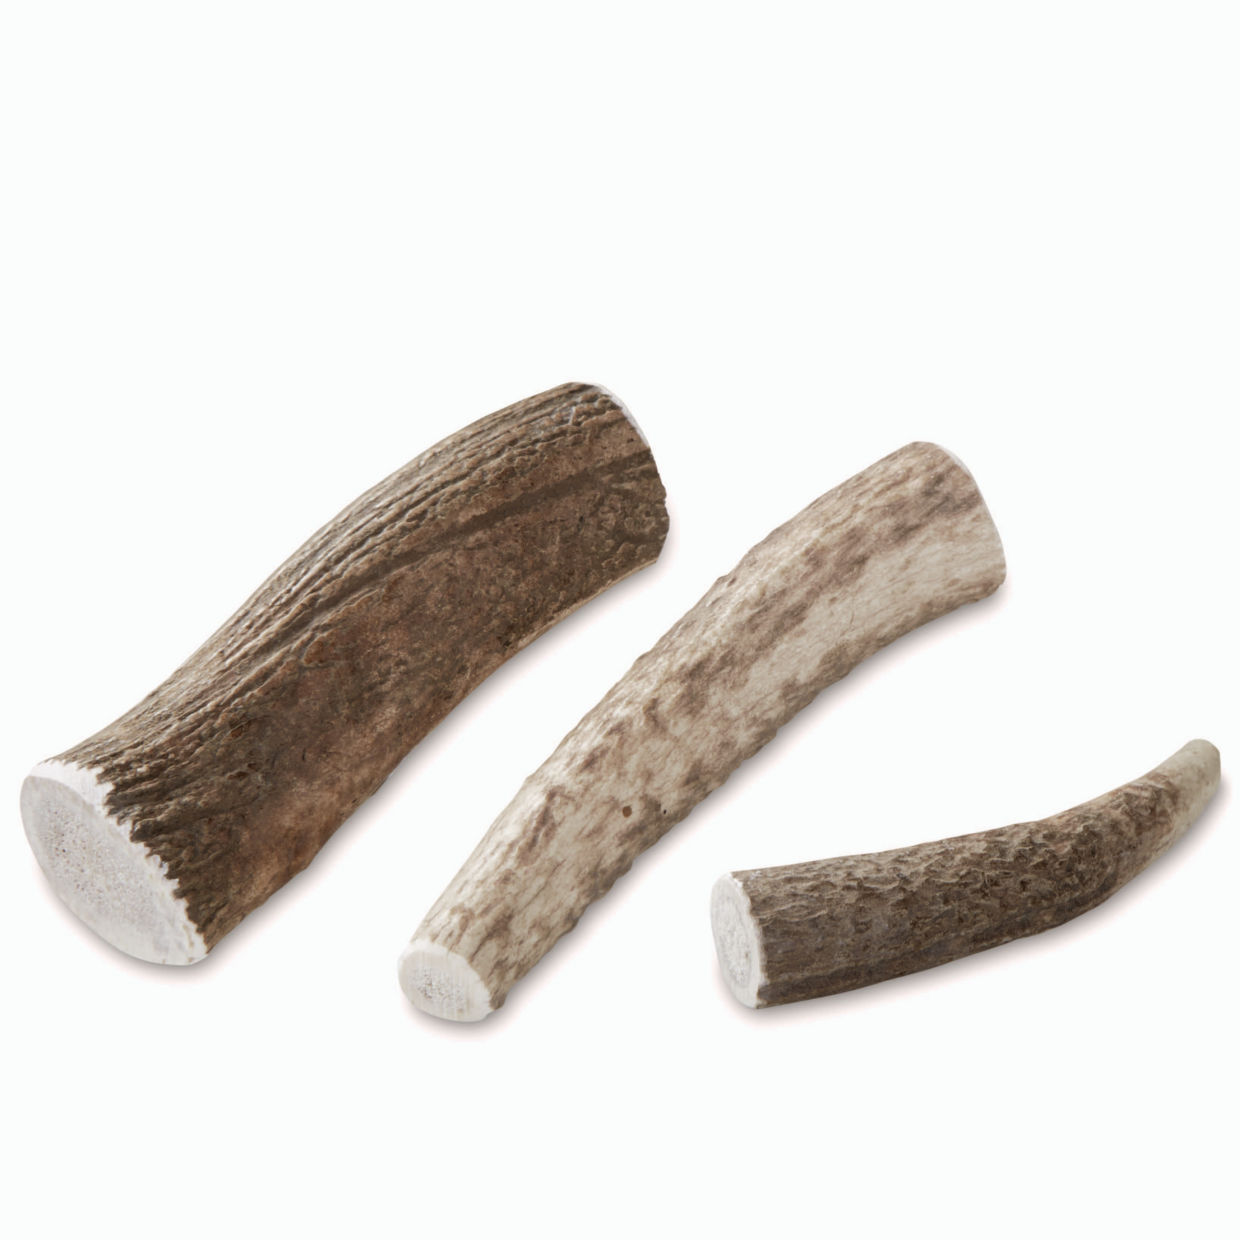 Elk Antler Dog Chews - 100% Natural Size Large (For Dogs 30-50 Lbs) Orvis